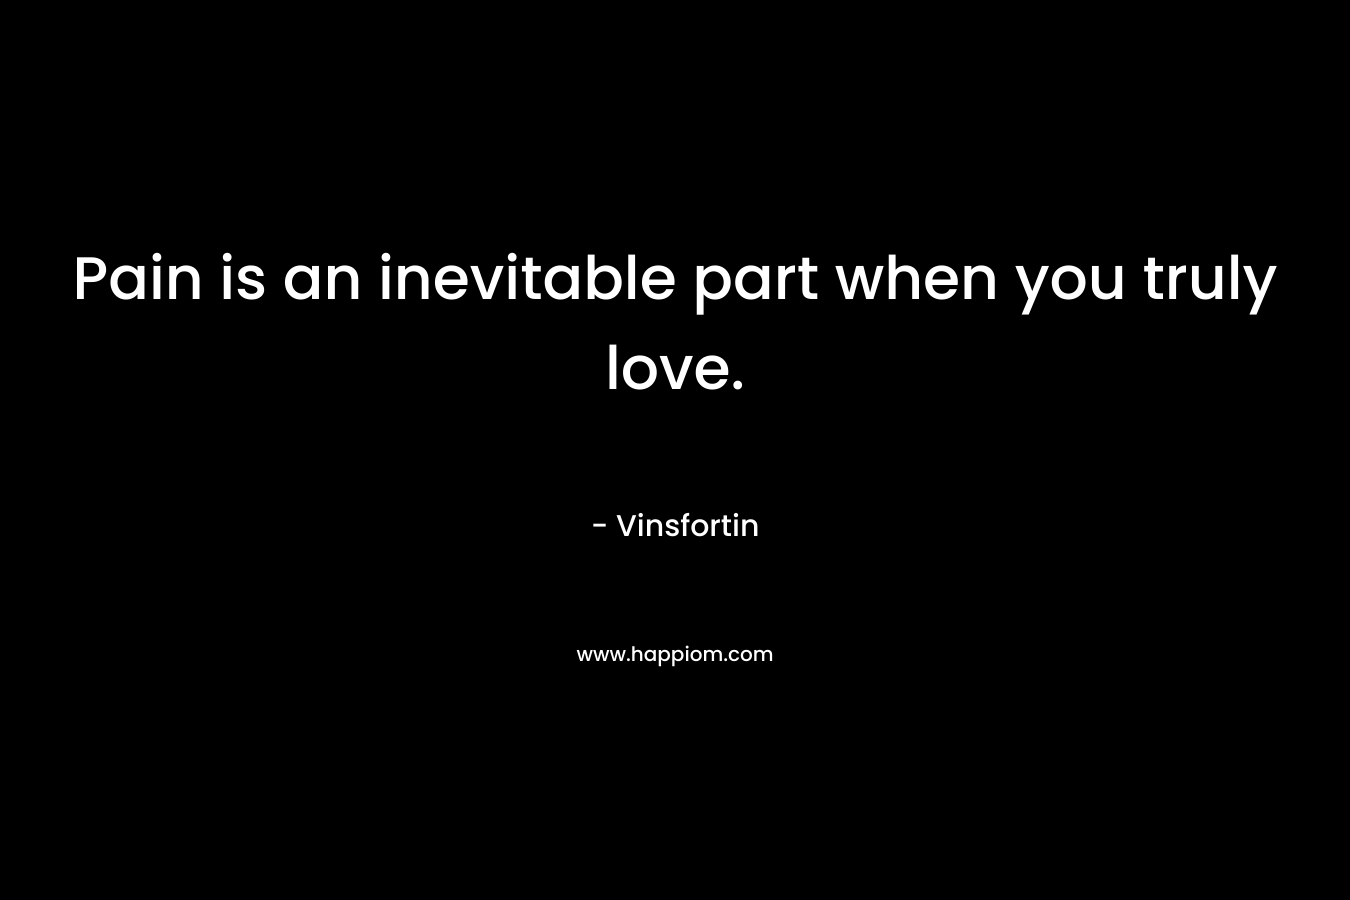 Pain is an inevitable part when you truly love.